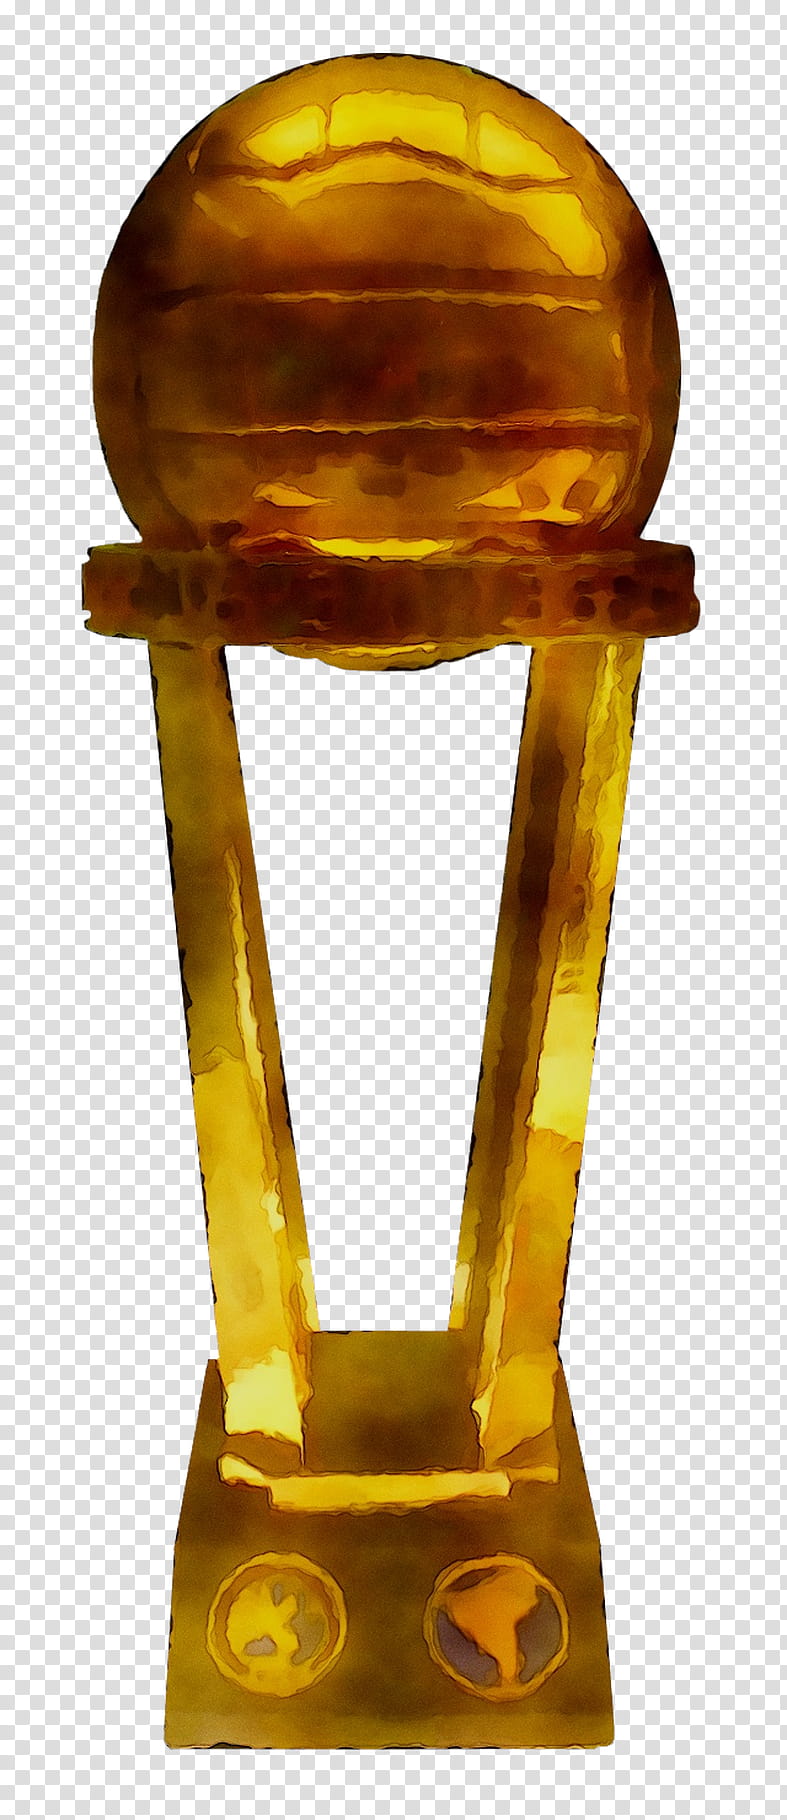 World Cup Trophy, Feyenoord, Football, FIFA Club World Cup, La Liga, Uefa Champions League, Sports, Amber transparent background PNG clipart